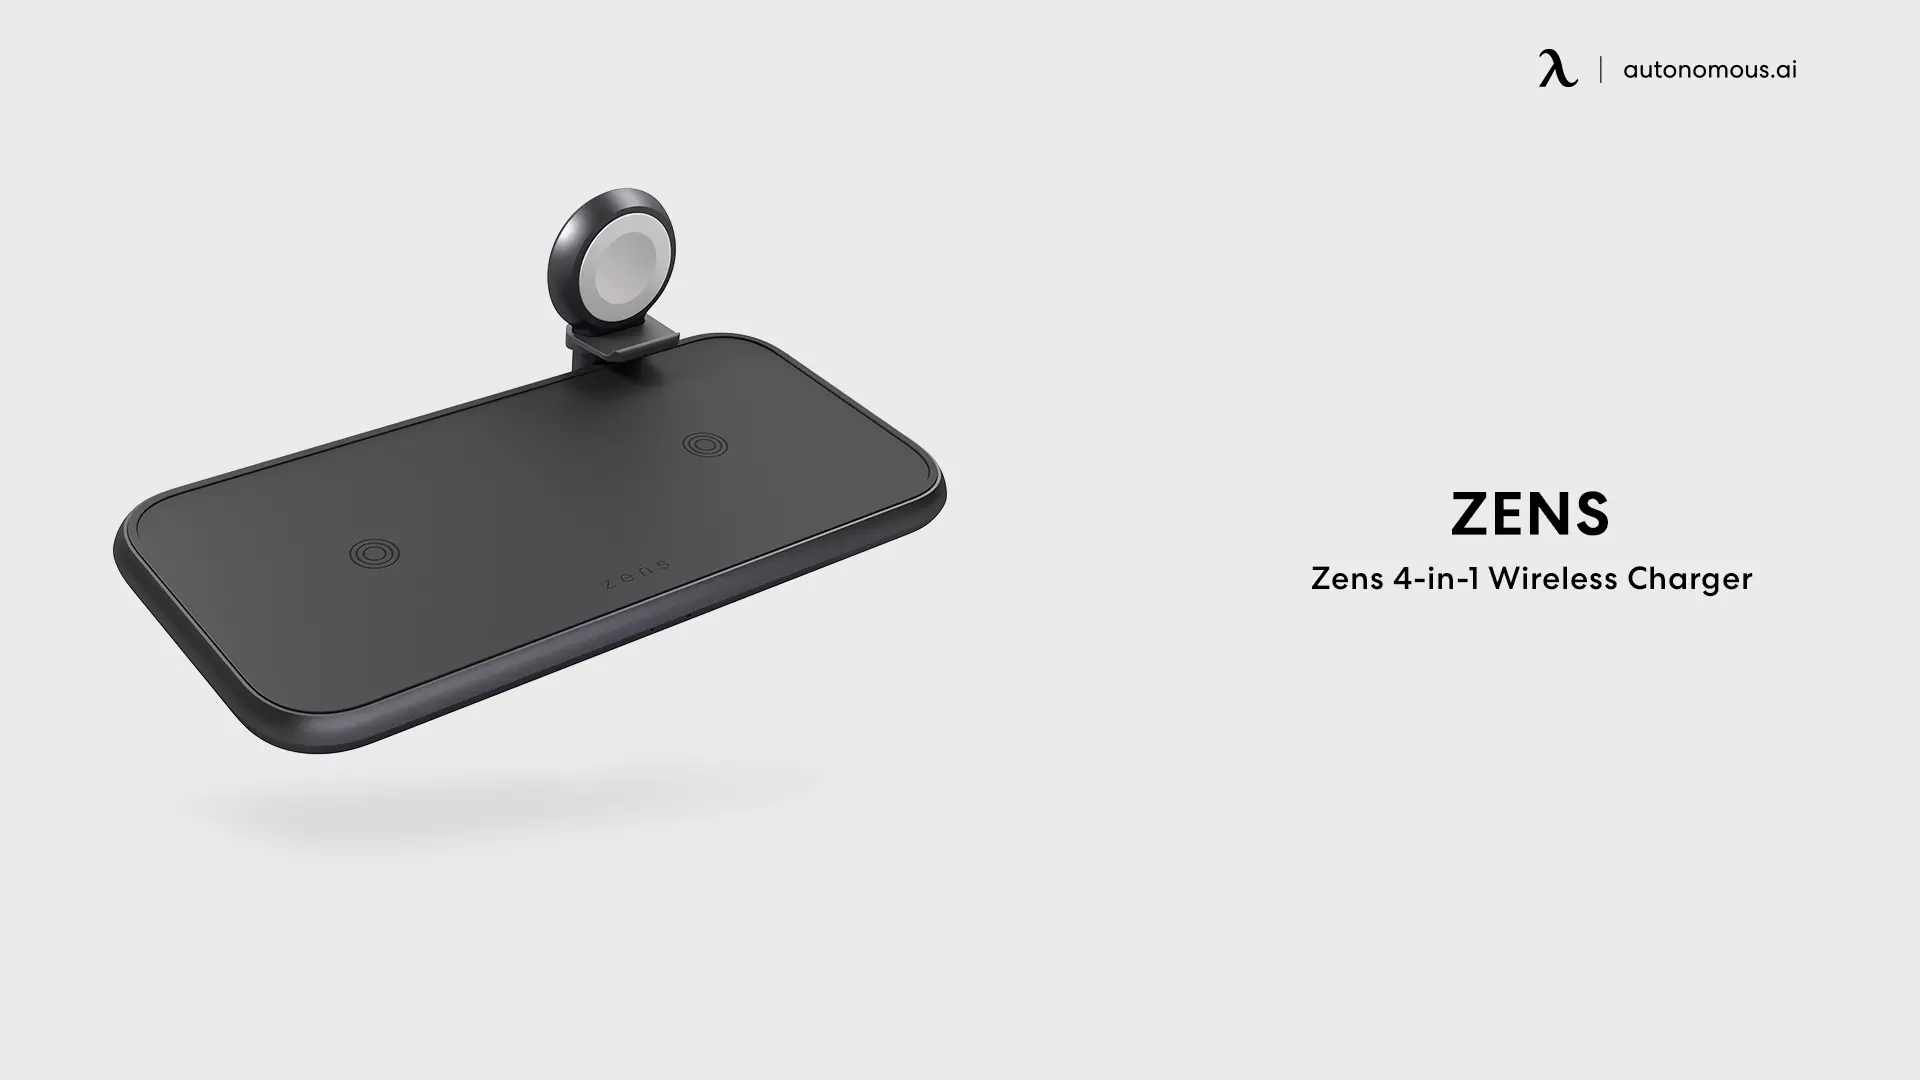 Zens 4-in-1 Wireless Charger - fast charger